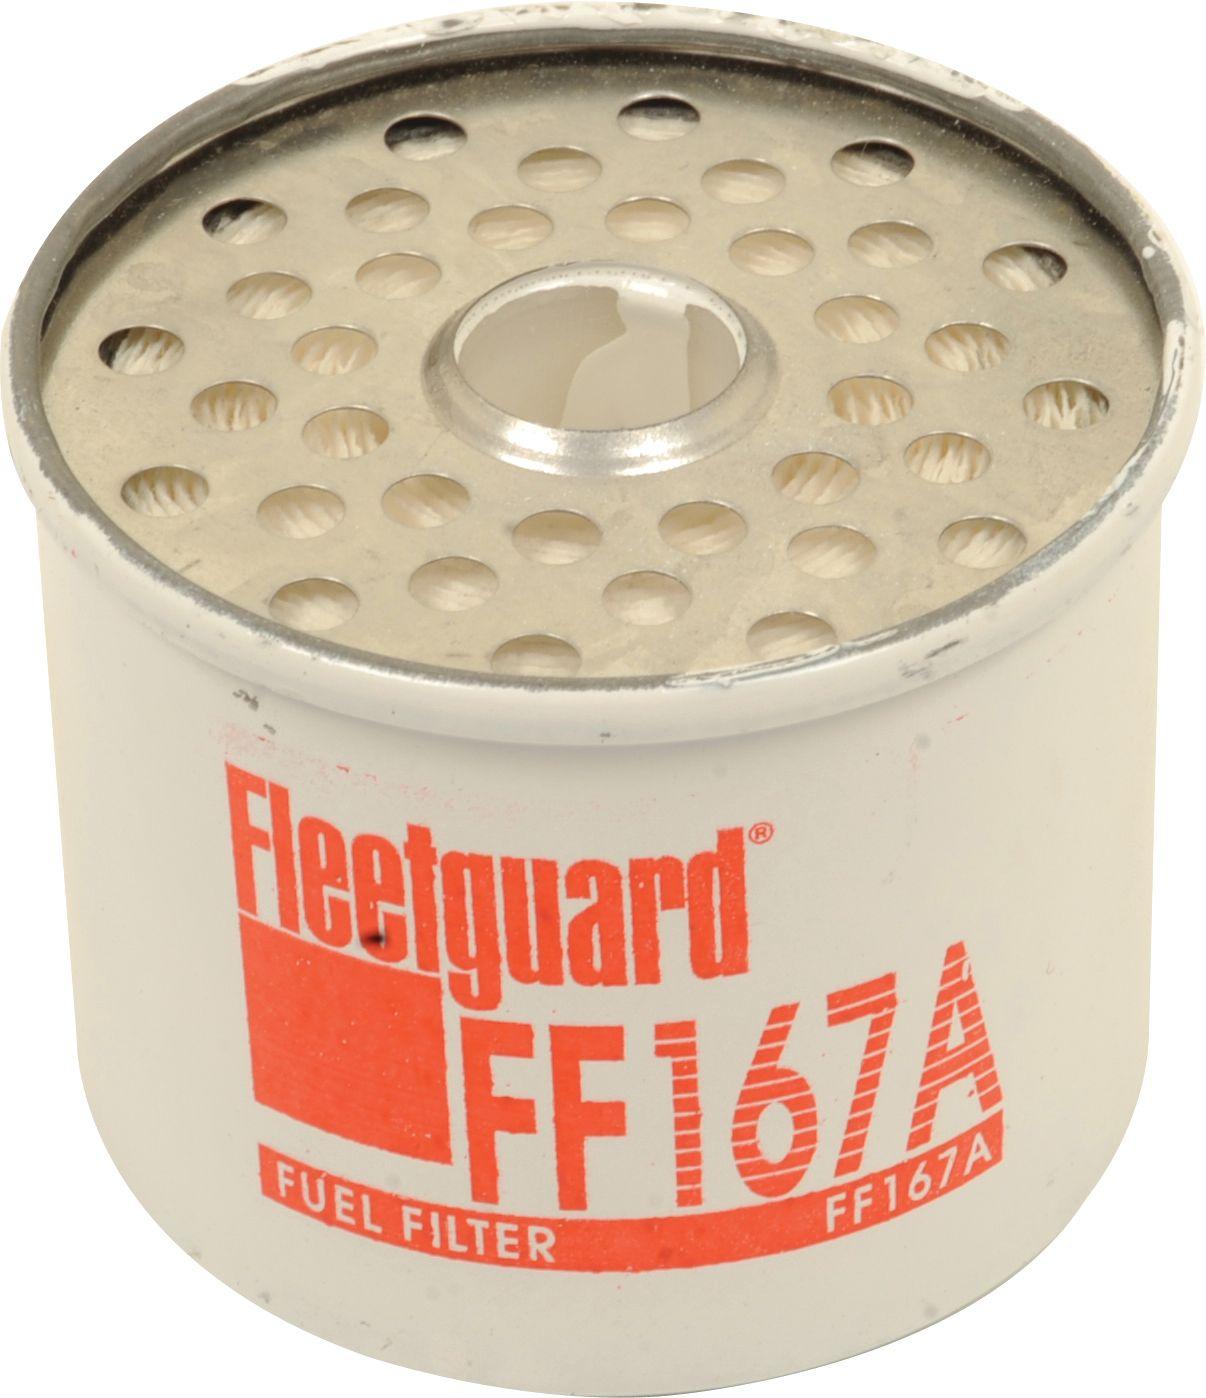 MANITOU FUEL FILTER FF167A 109024